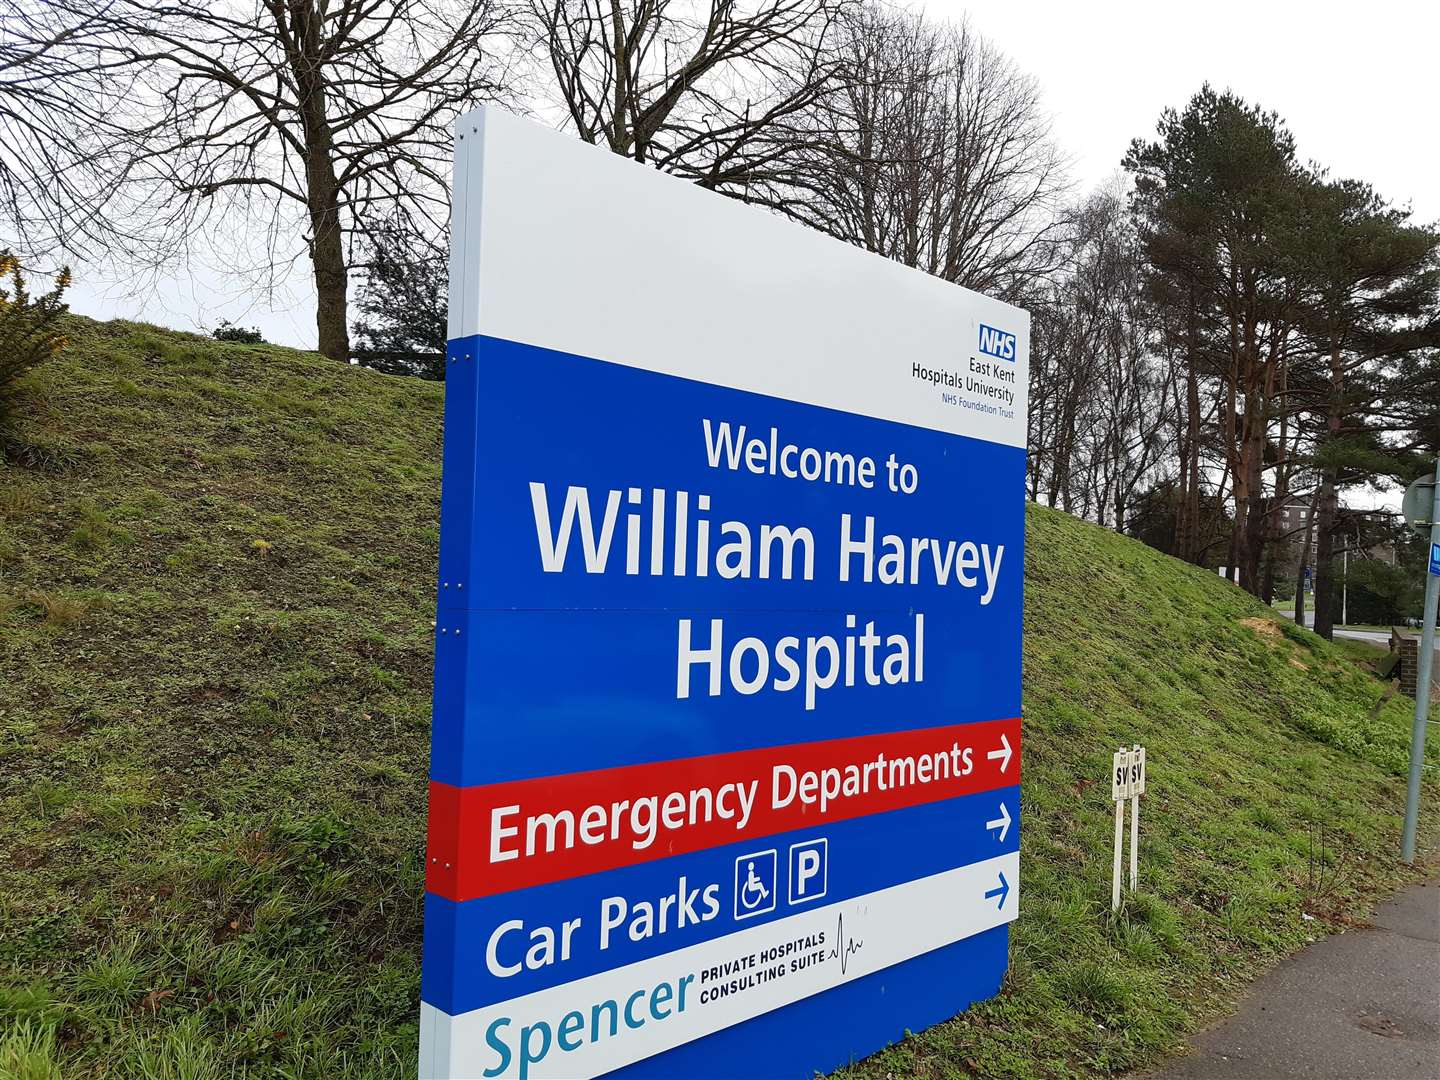 Almost £4,000 has been raised for the William Harvey Hospital